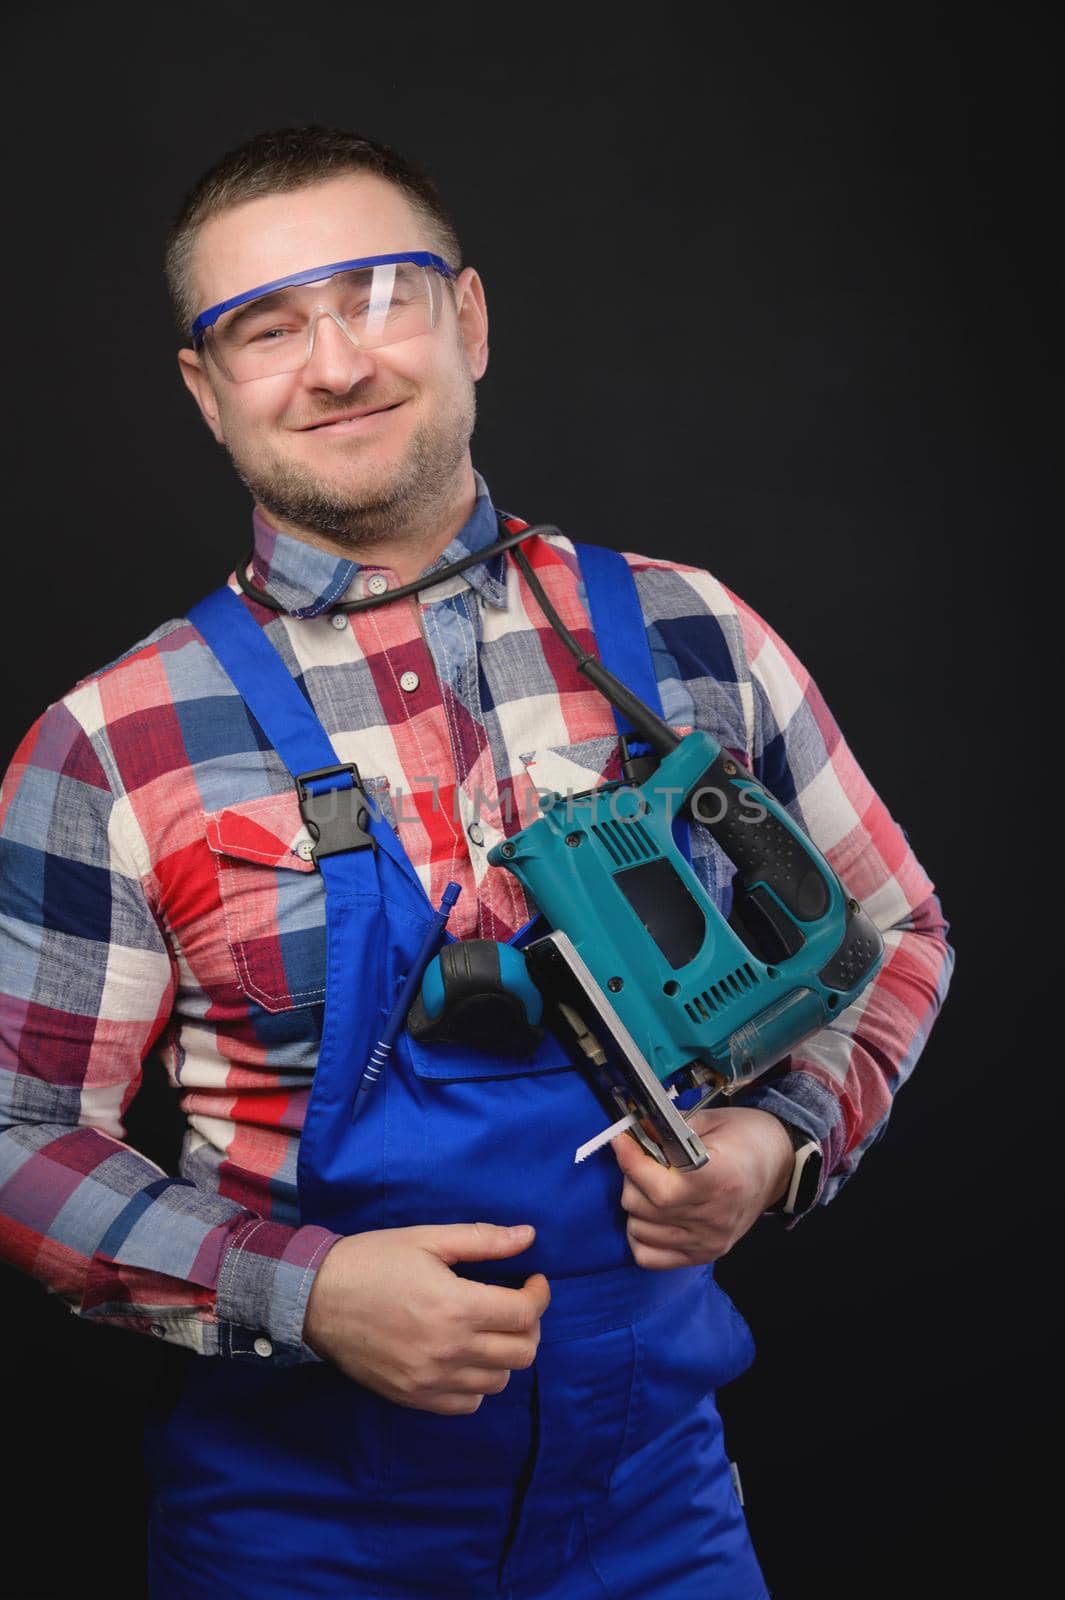 Portrait of a caucasian male repairman in a work uniform with an electric jigsaw around his neck. Studio portrait of an artisan businessman.